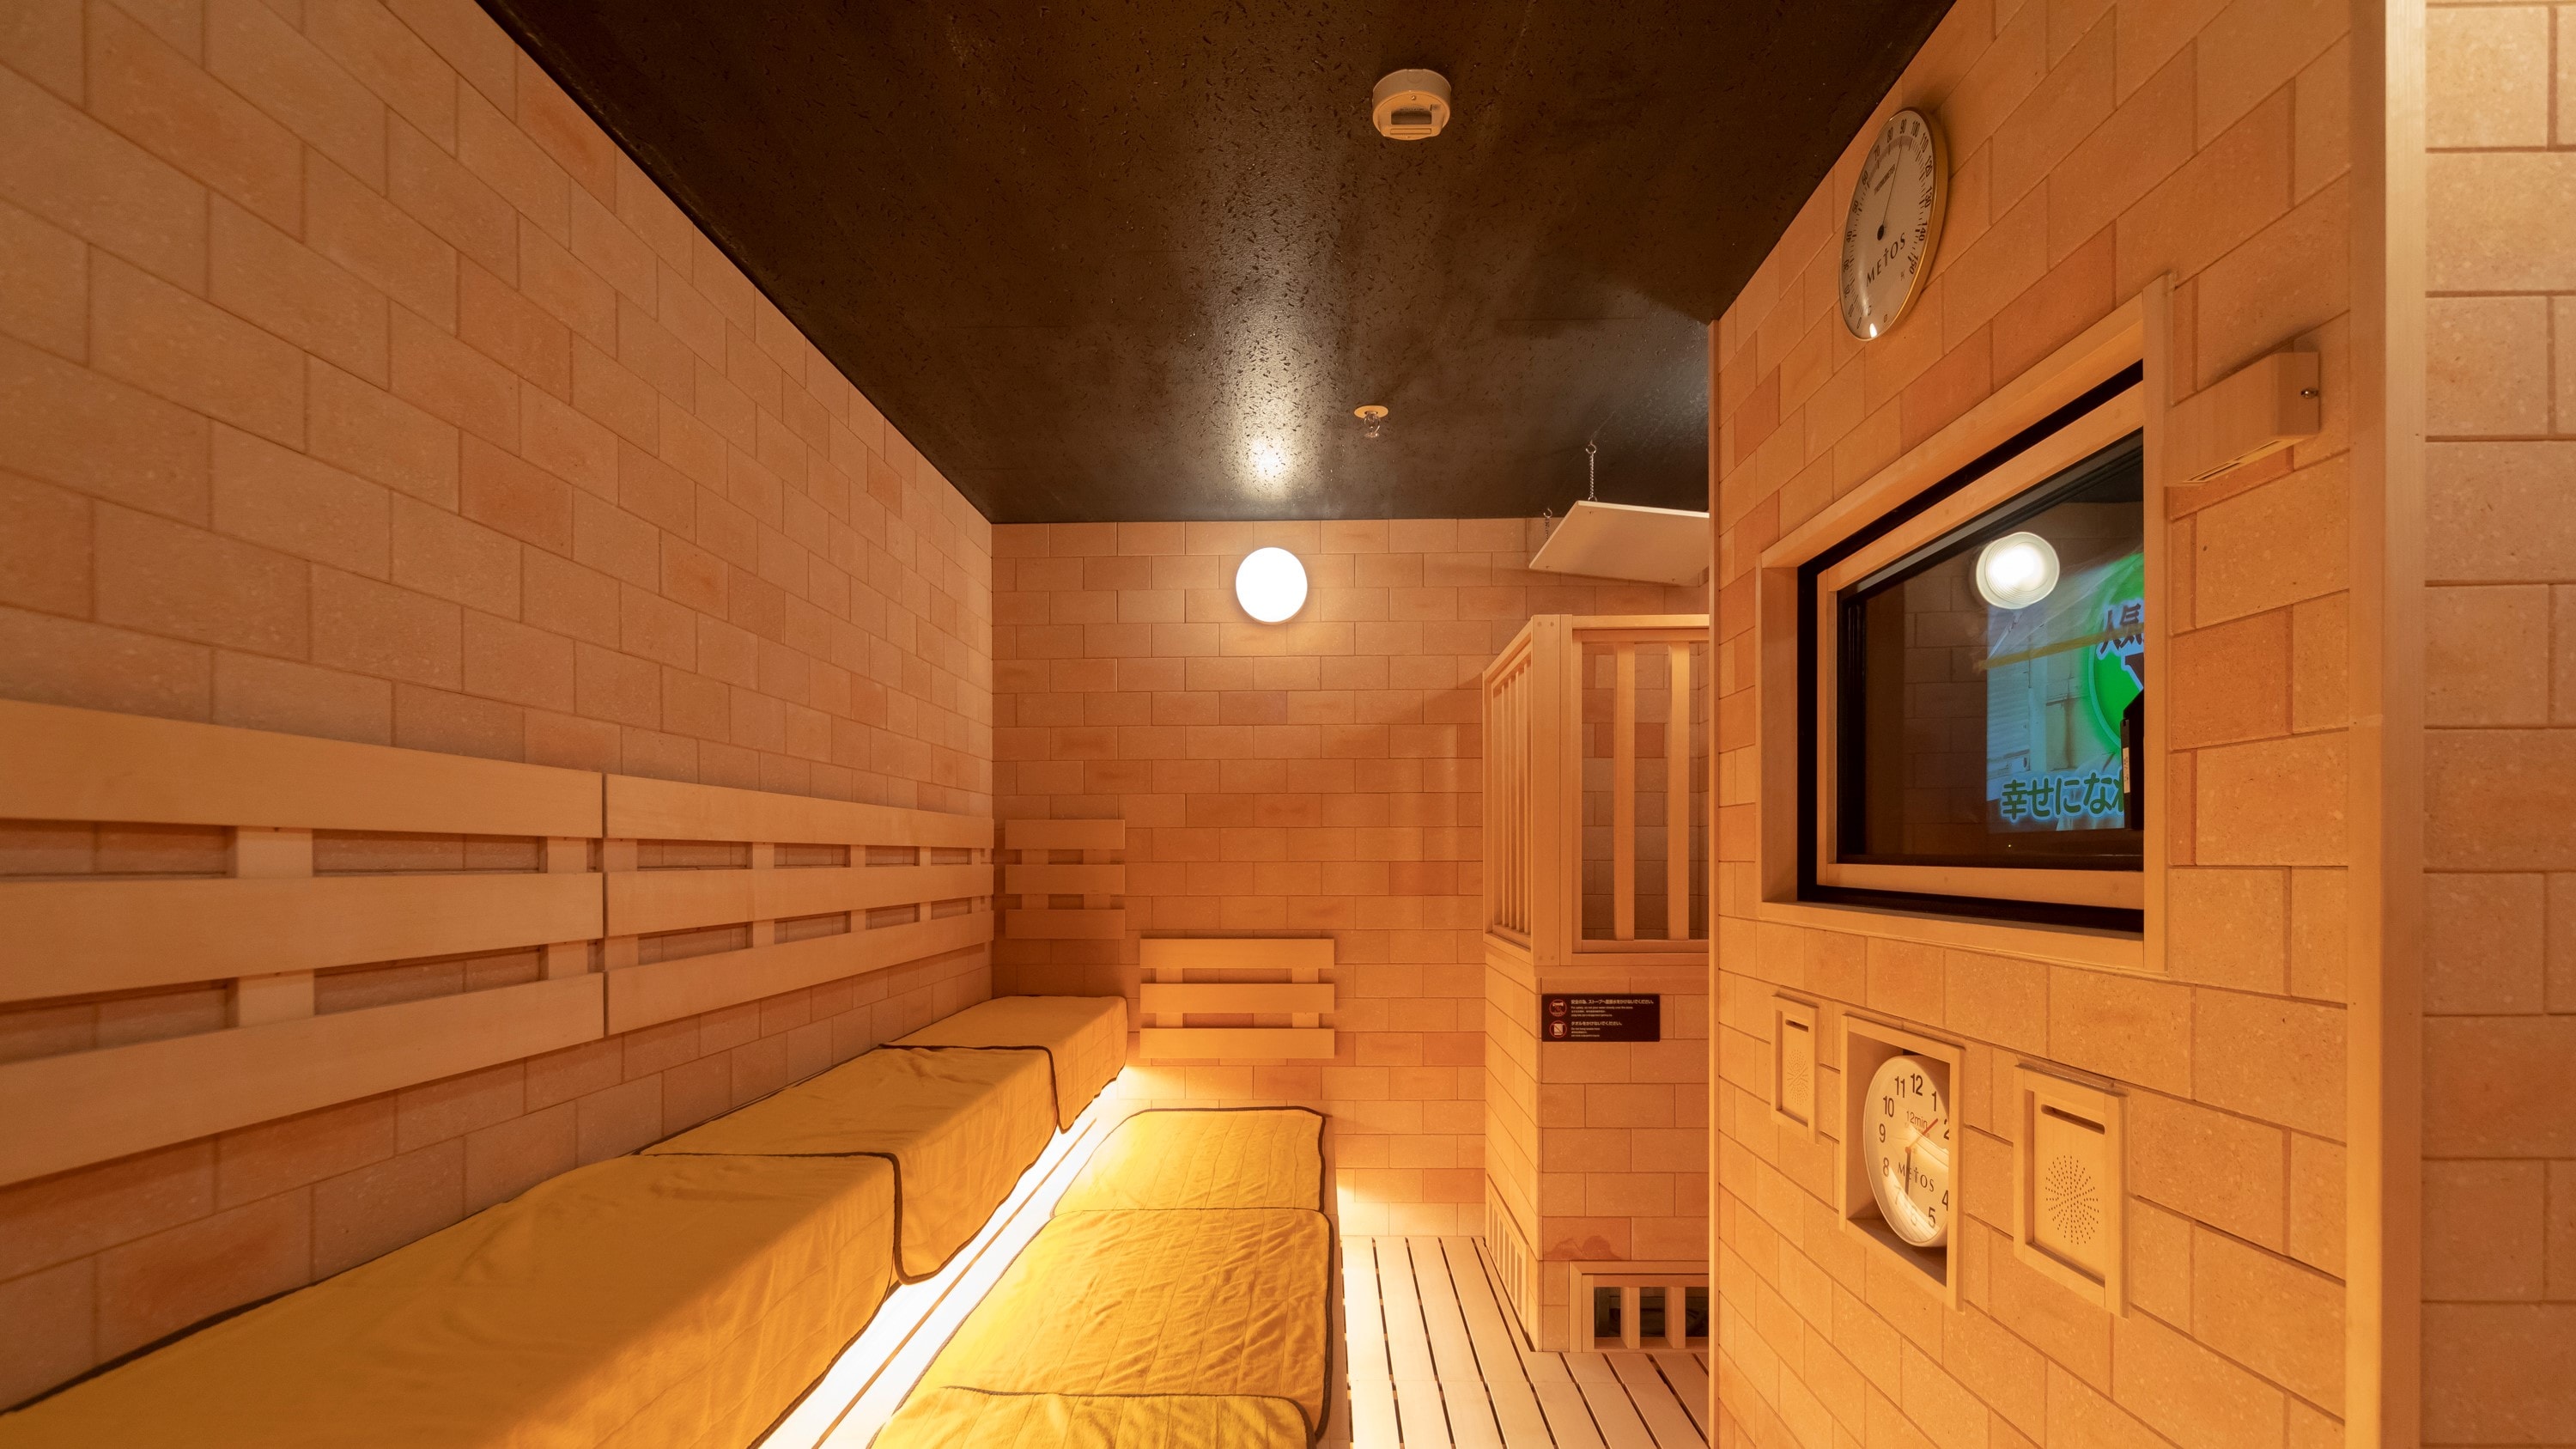 [Men] High temperature sauna (temperature 95-98 ℃) * Suspended from 1:00 midnight to 5:00 early morning